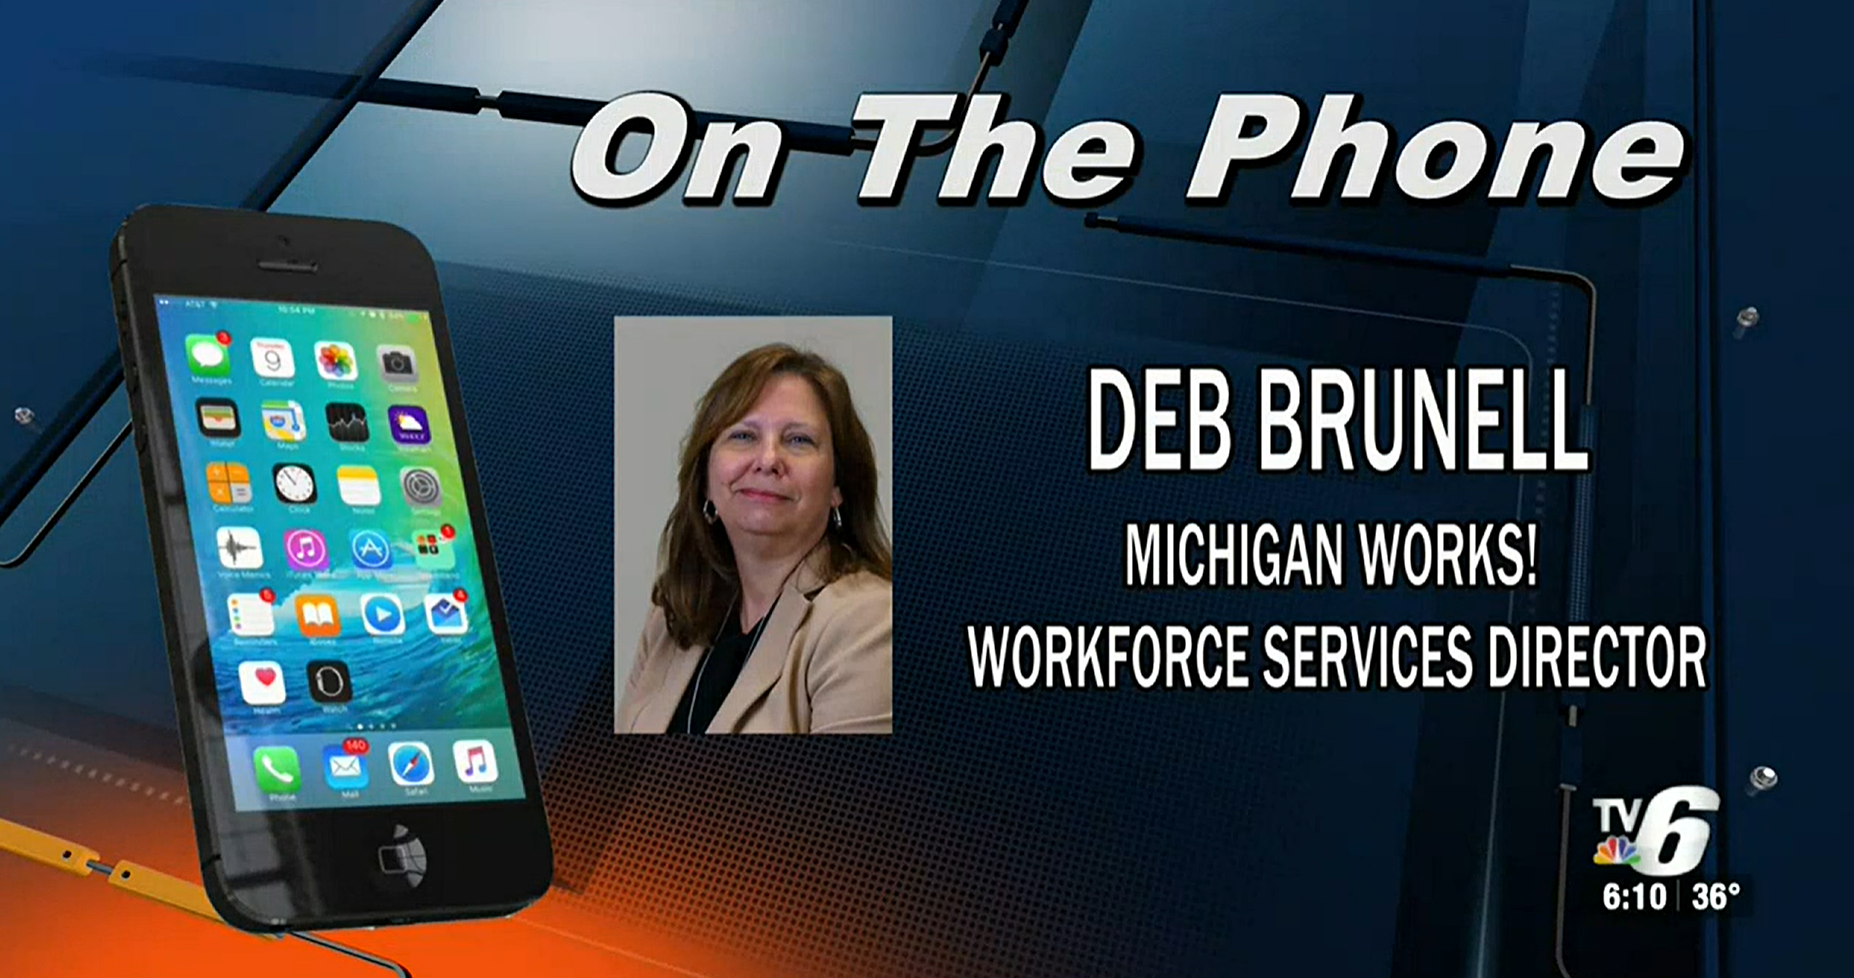 A screenshot from a video interview featuring Debb Brunell and TV 6.